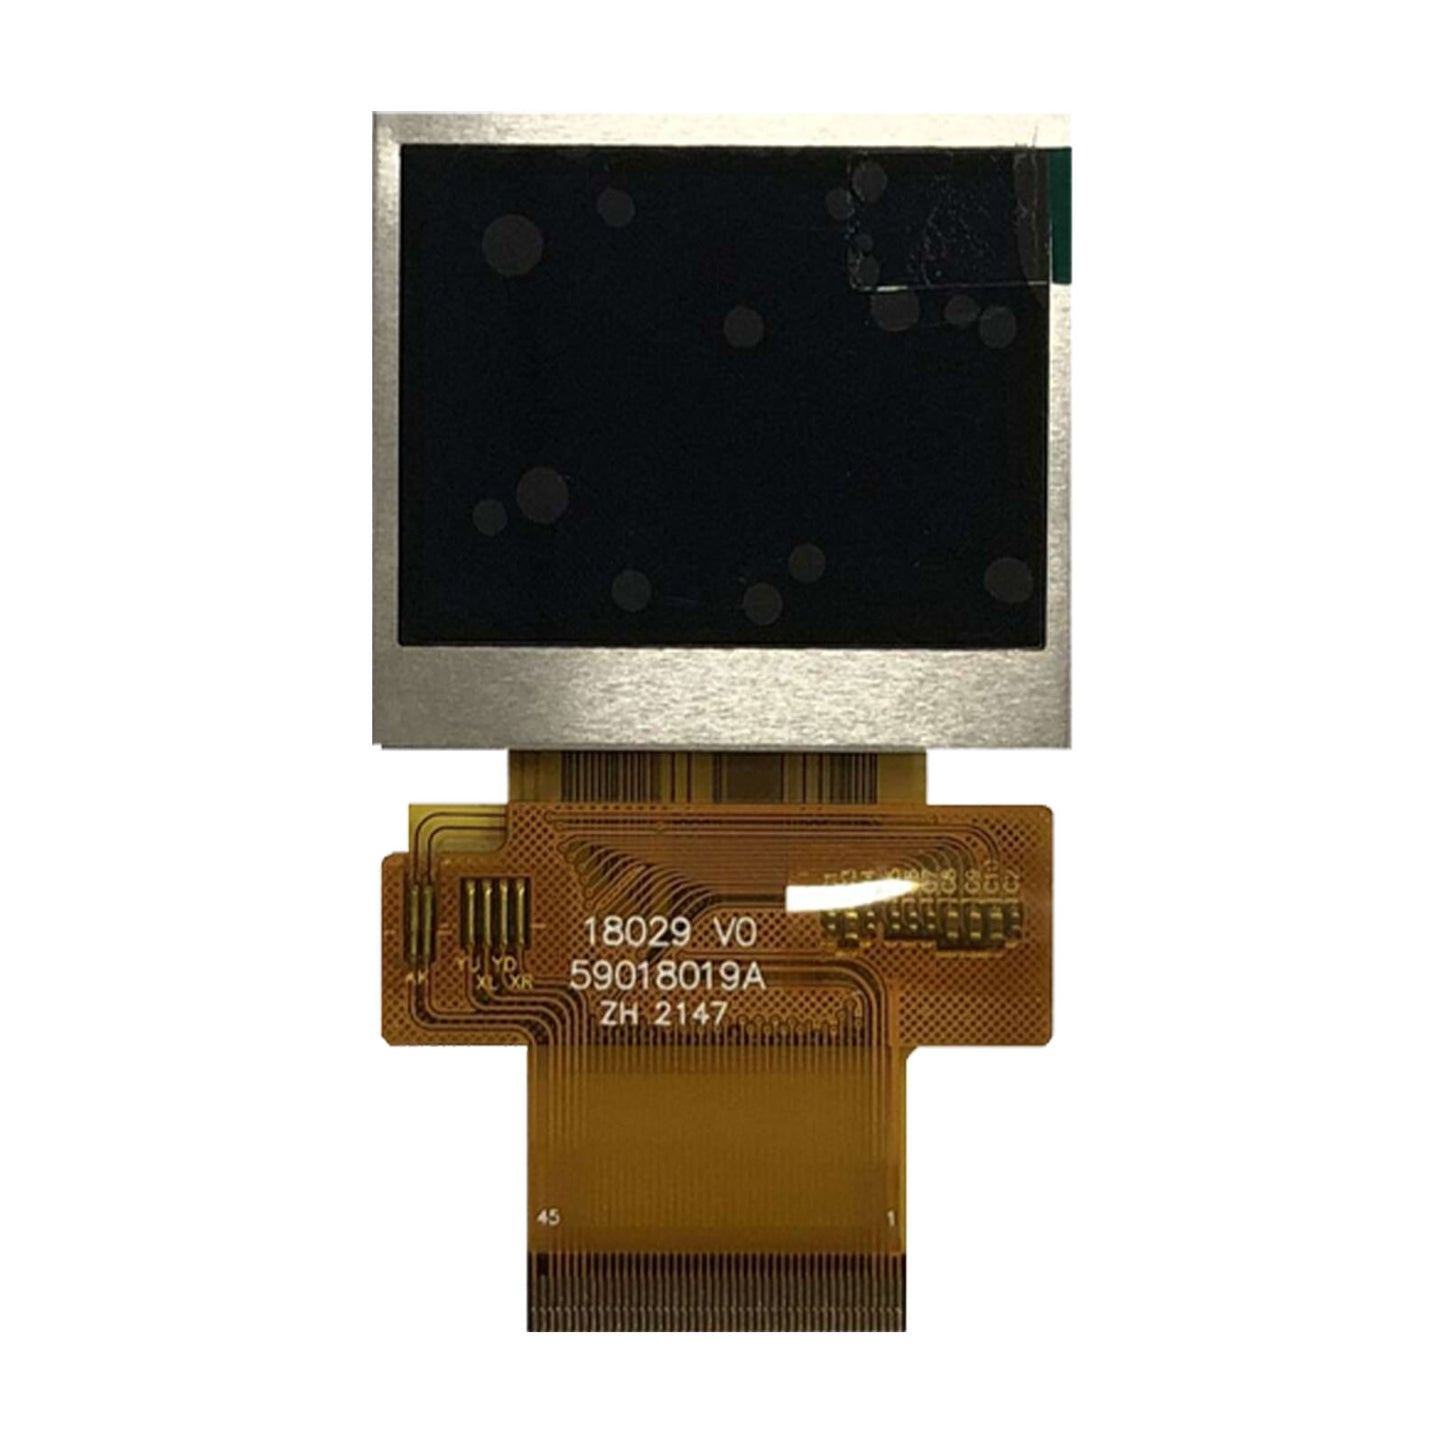 1.75-inch TFT Transflective Display with a resolution of 296 by 220 pixels, compatible with MCU interface